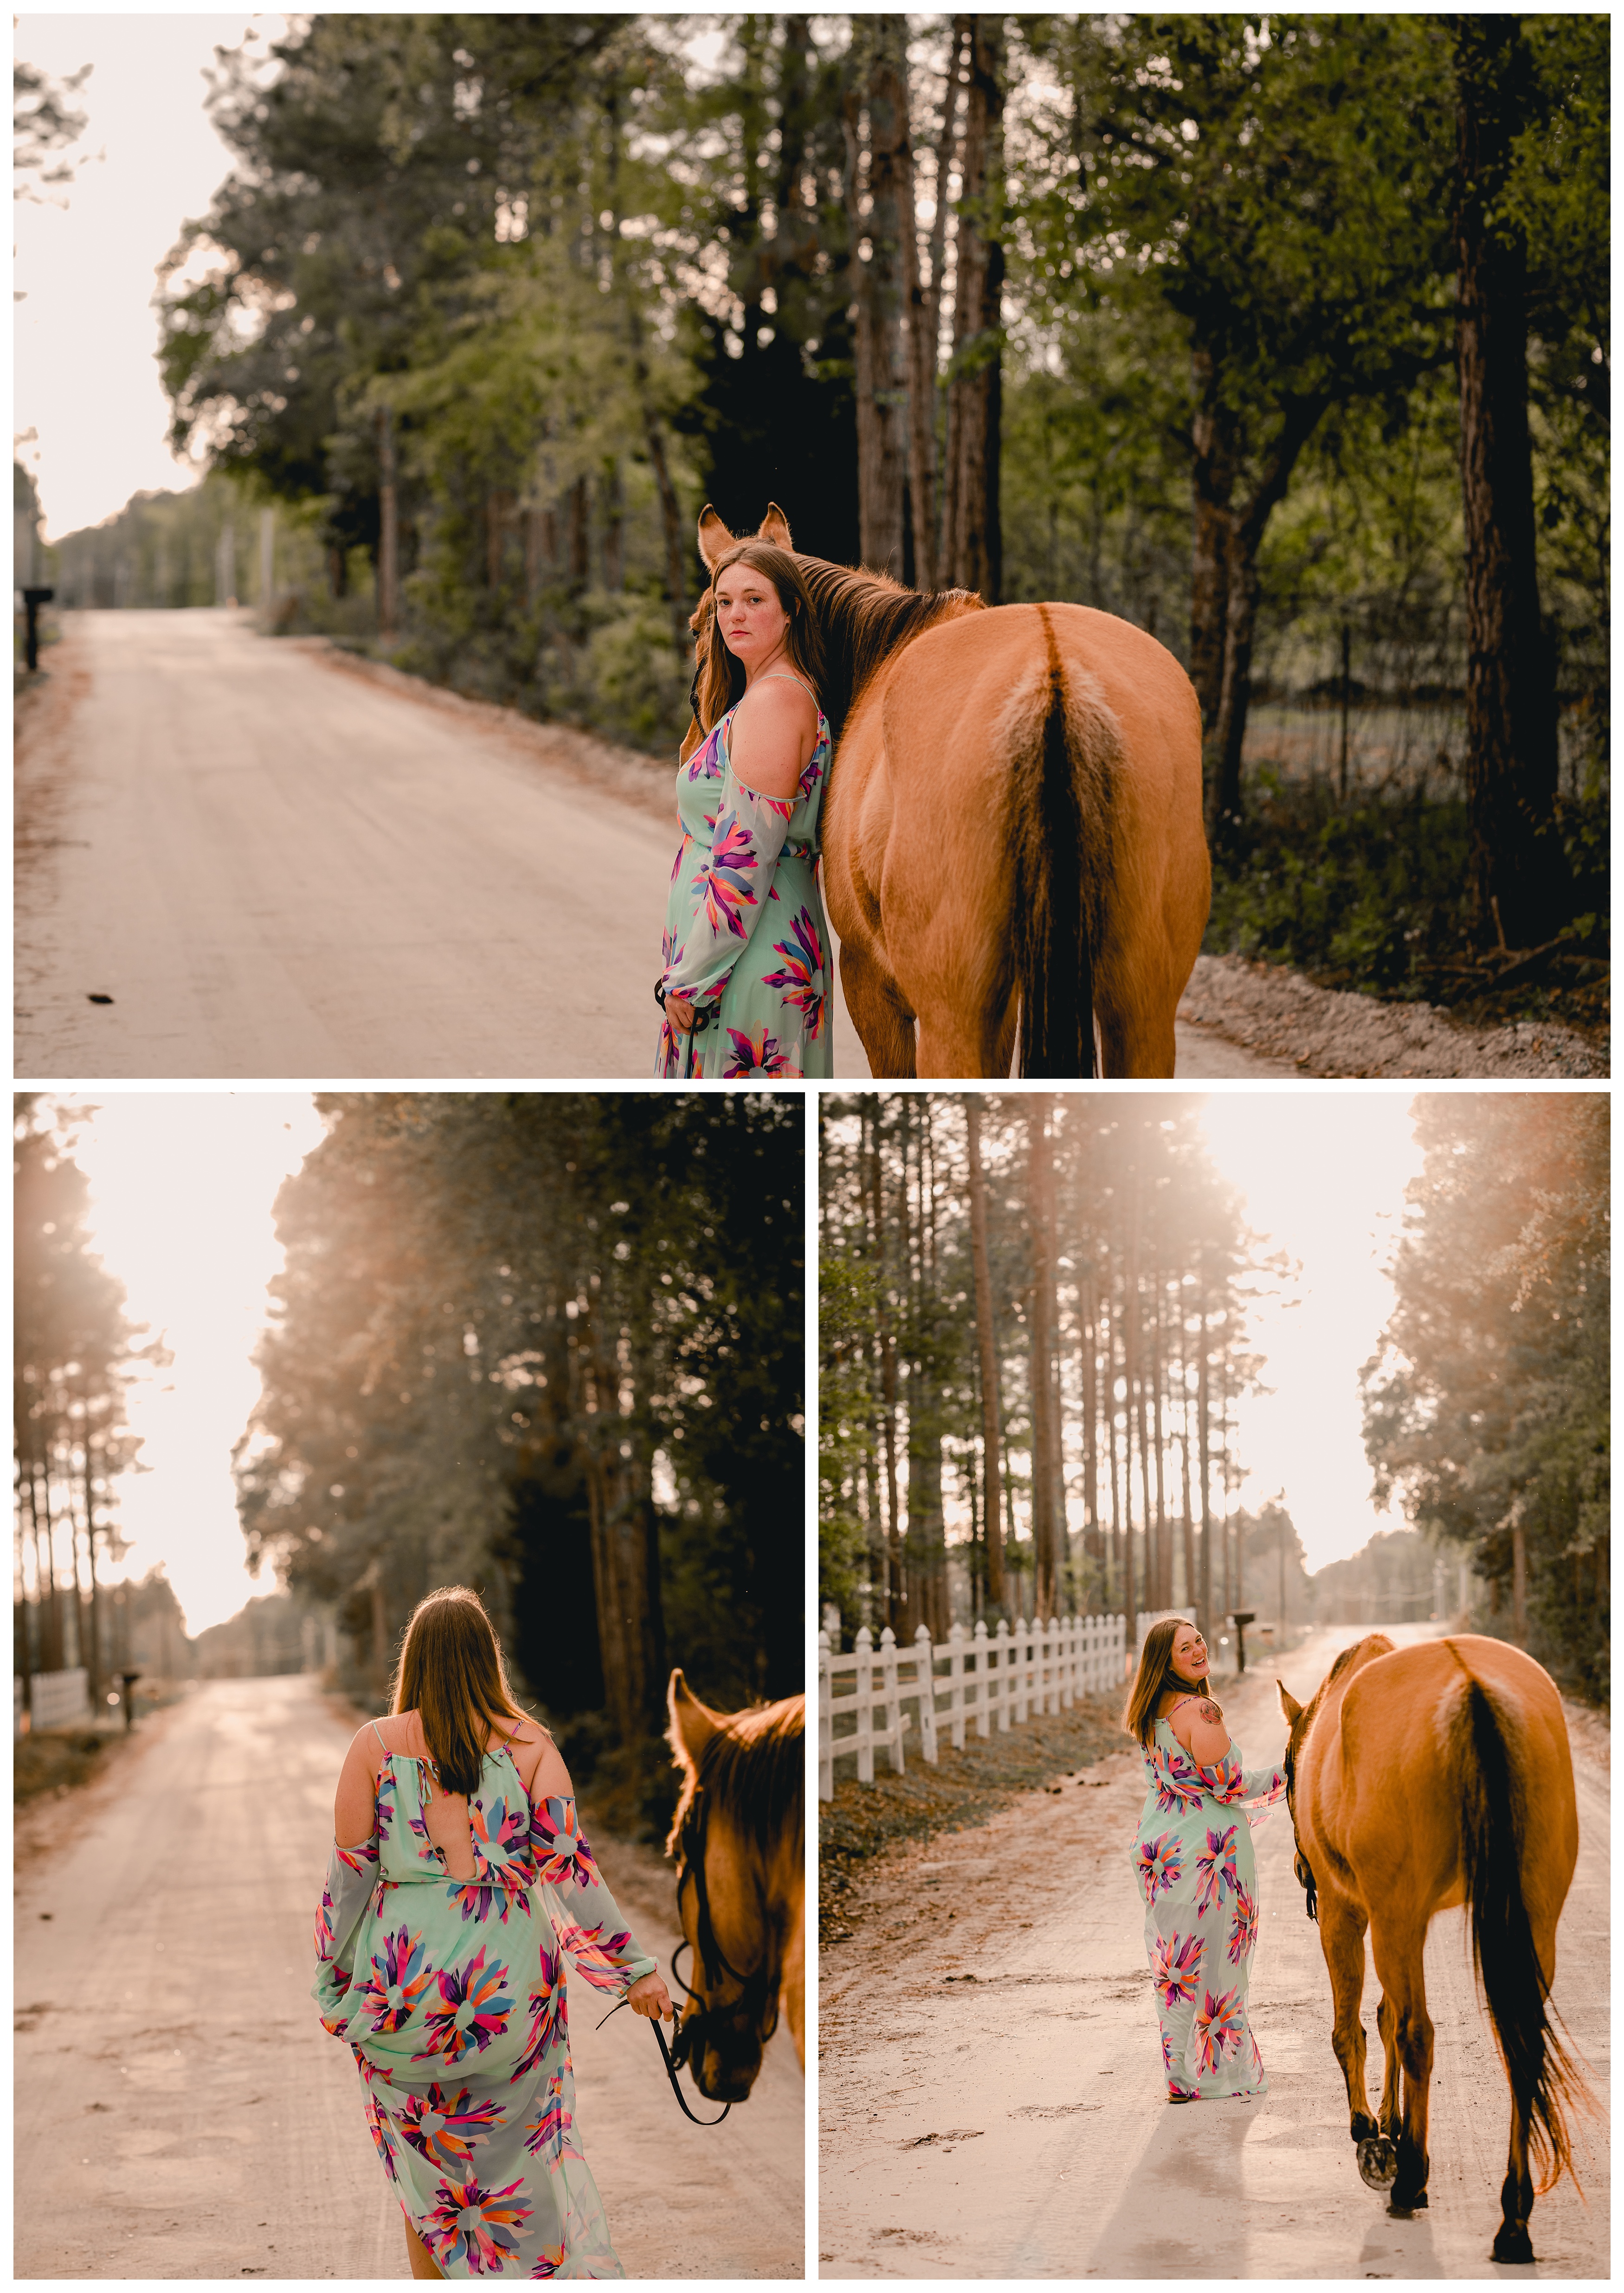 Sunset photos of horse and rider on dirt road in Florida by pro photographer. Shelly Williams Photography